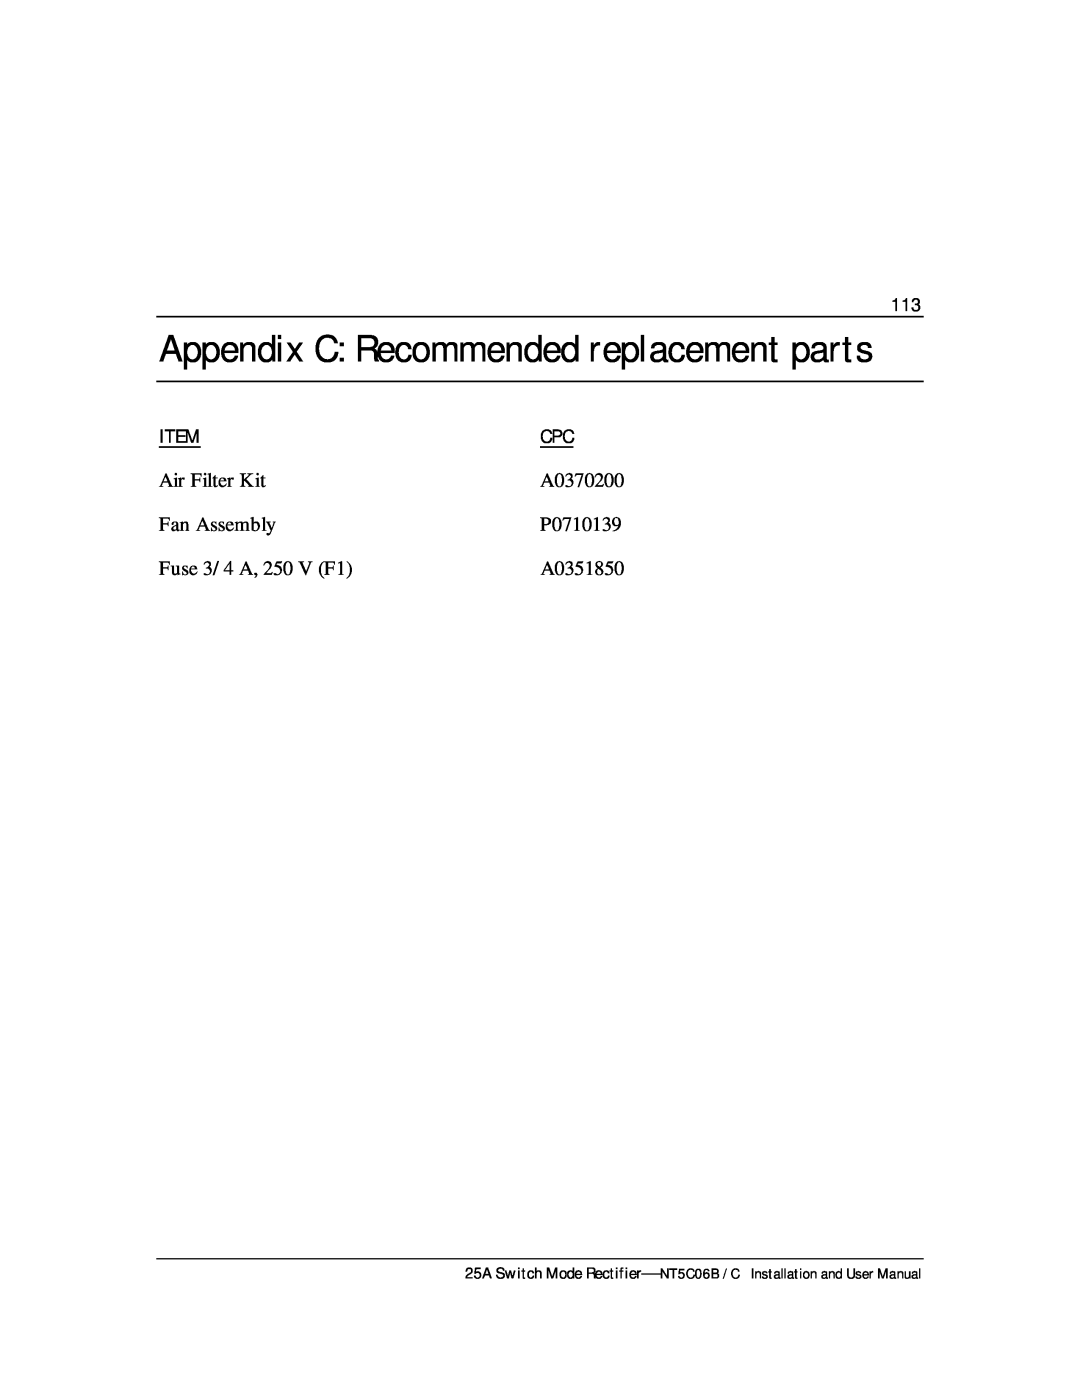 Emerson MPR25, MPR15 Series user manual Appendix C Recommended replacement parts, A0370200, P0710139, A0351850 